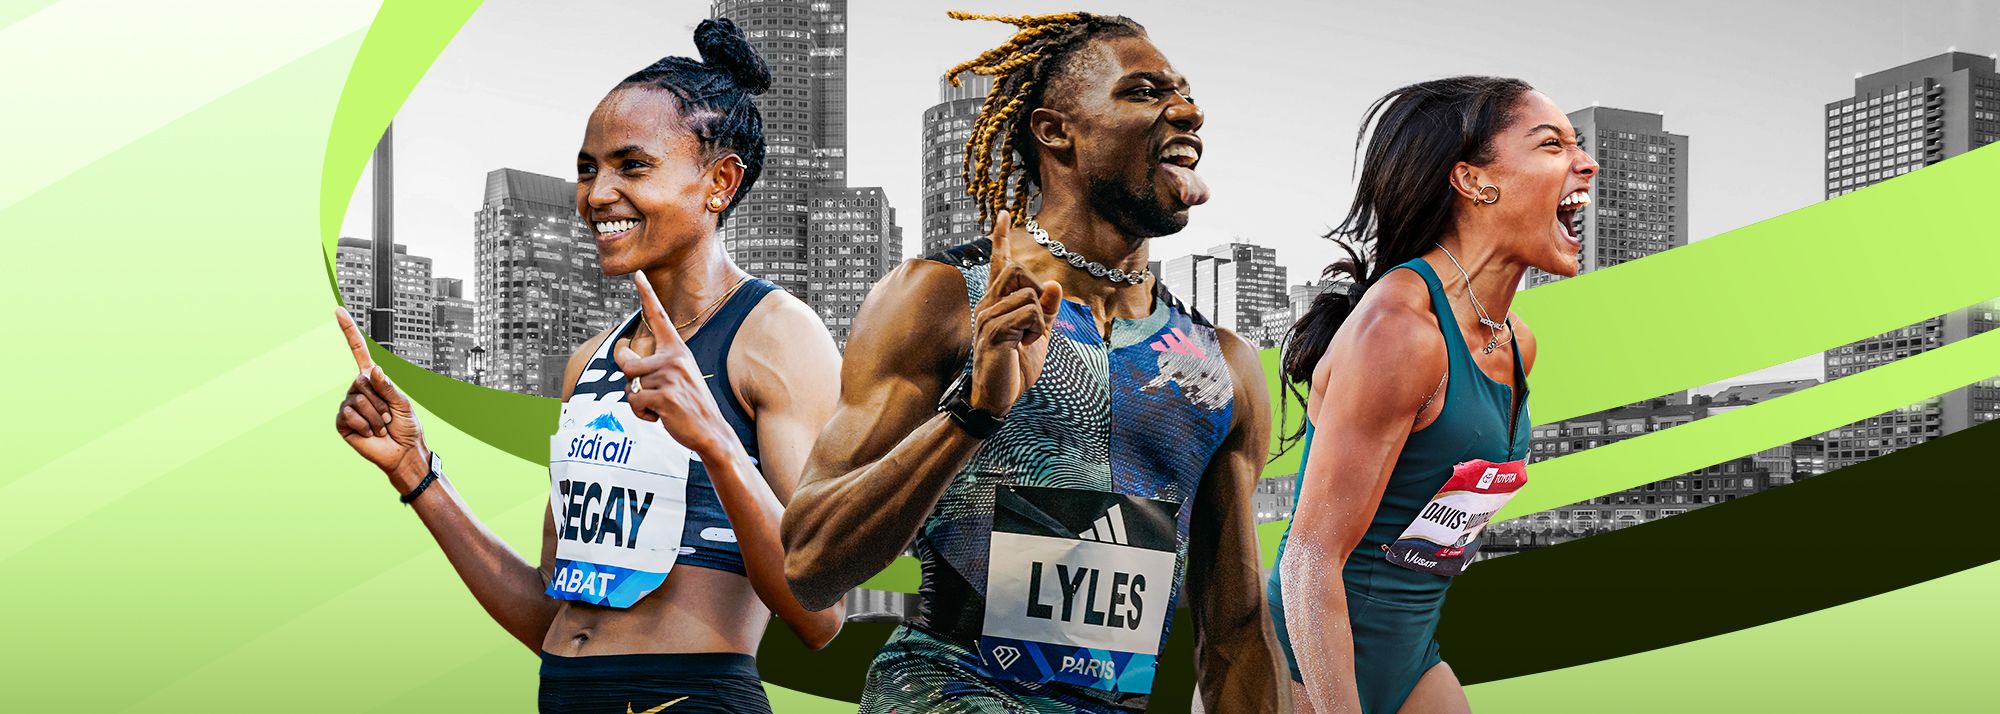 Here's how you can watch and follow the World Athletics Indoor Tour Gold meeting in Boston